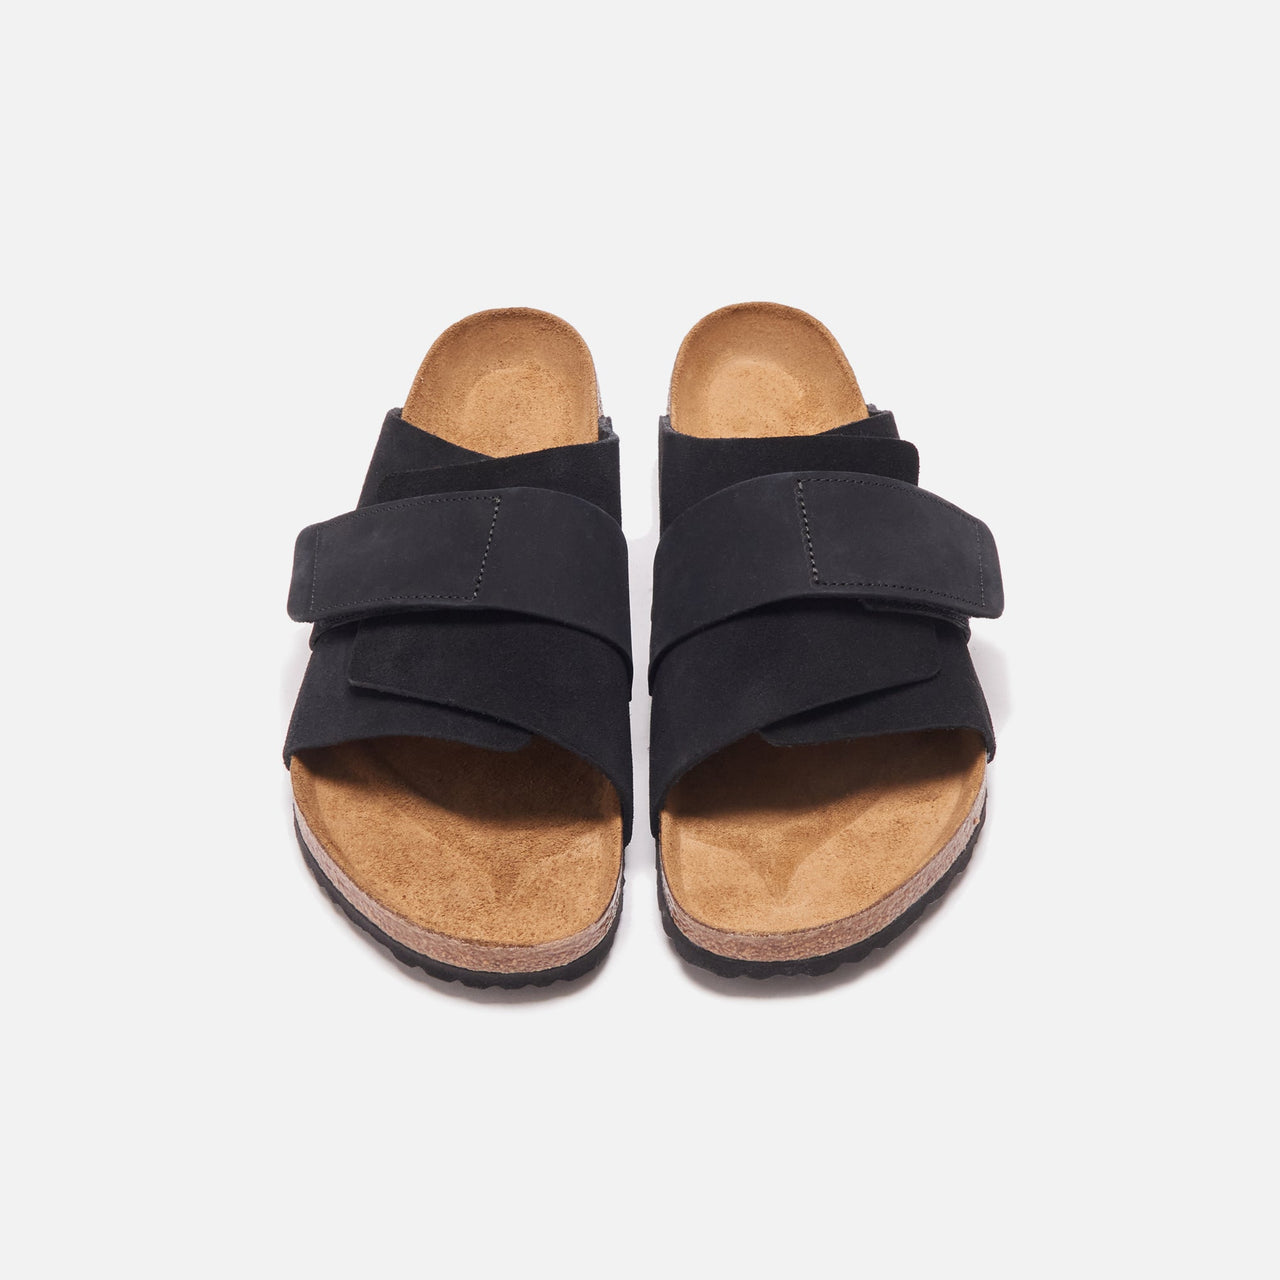 Versatile Birkenstock Kyoto Suede Black sandal suitable for casual and dressy outfits